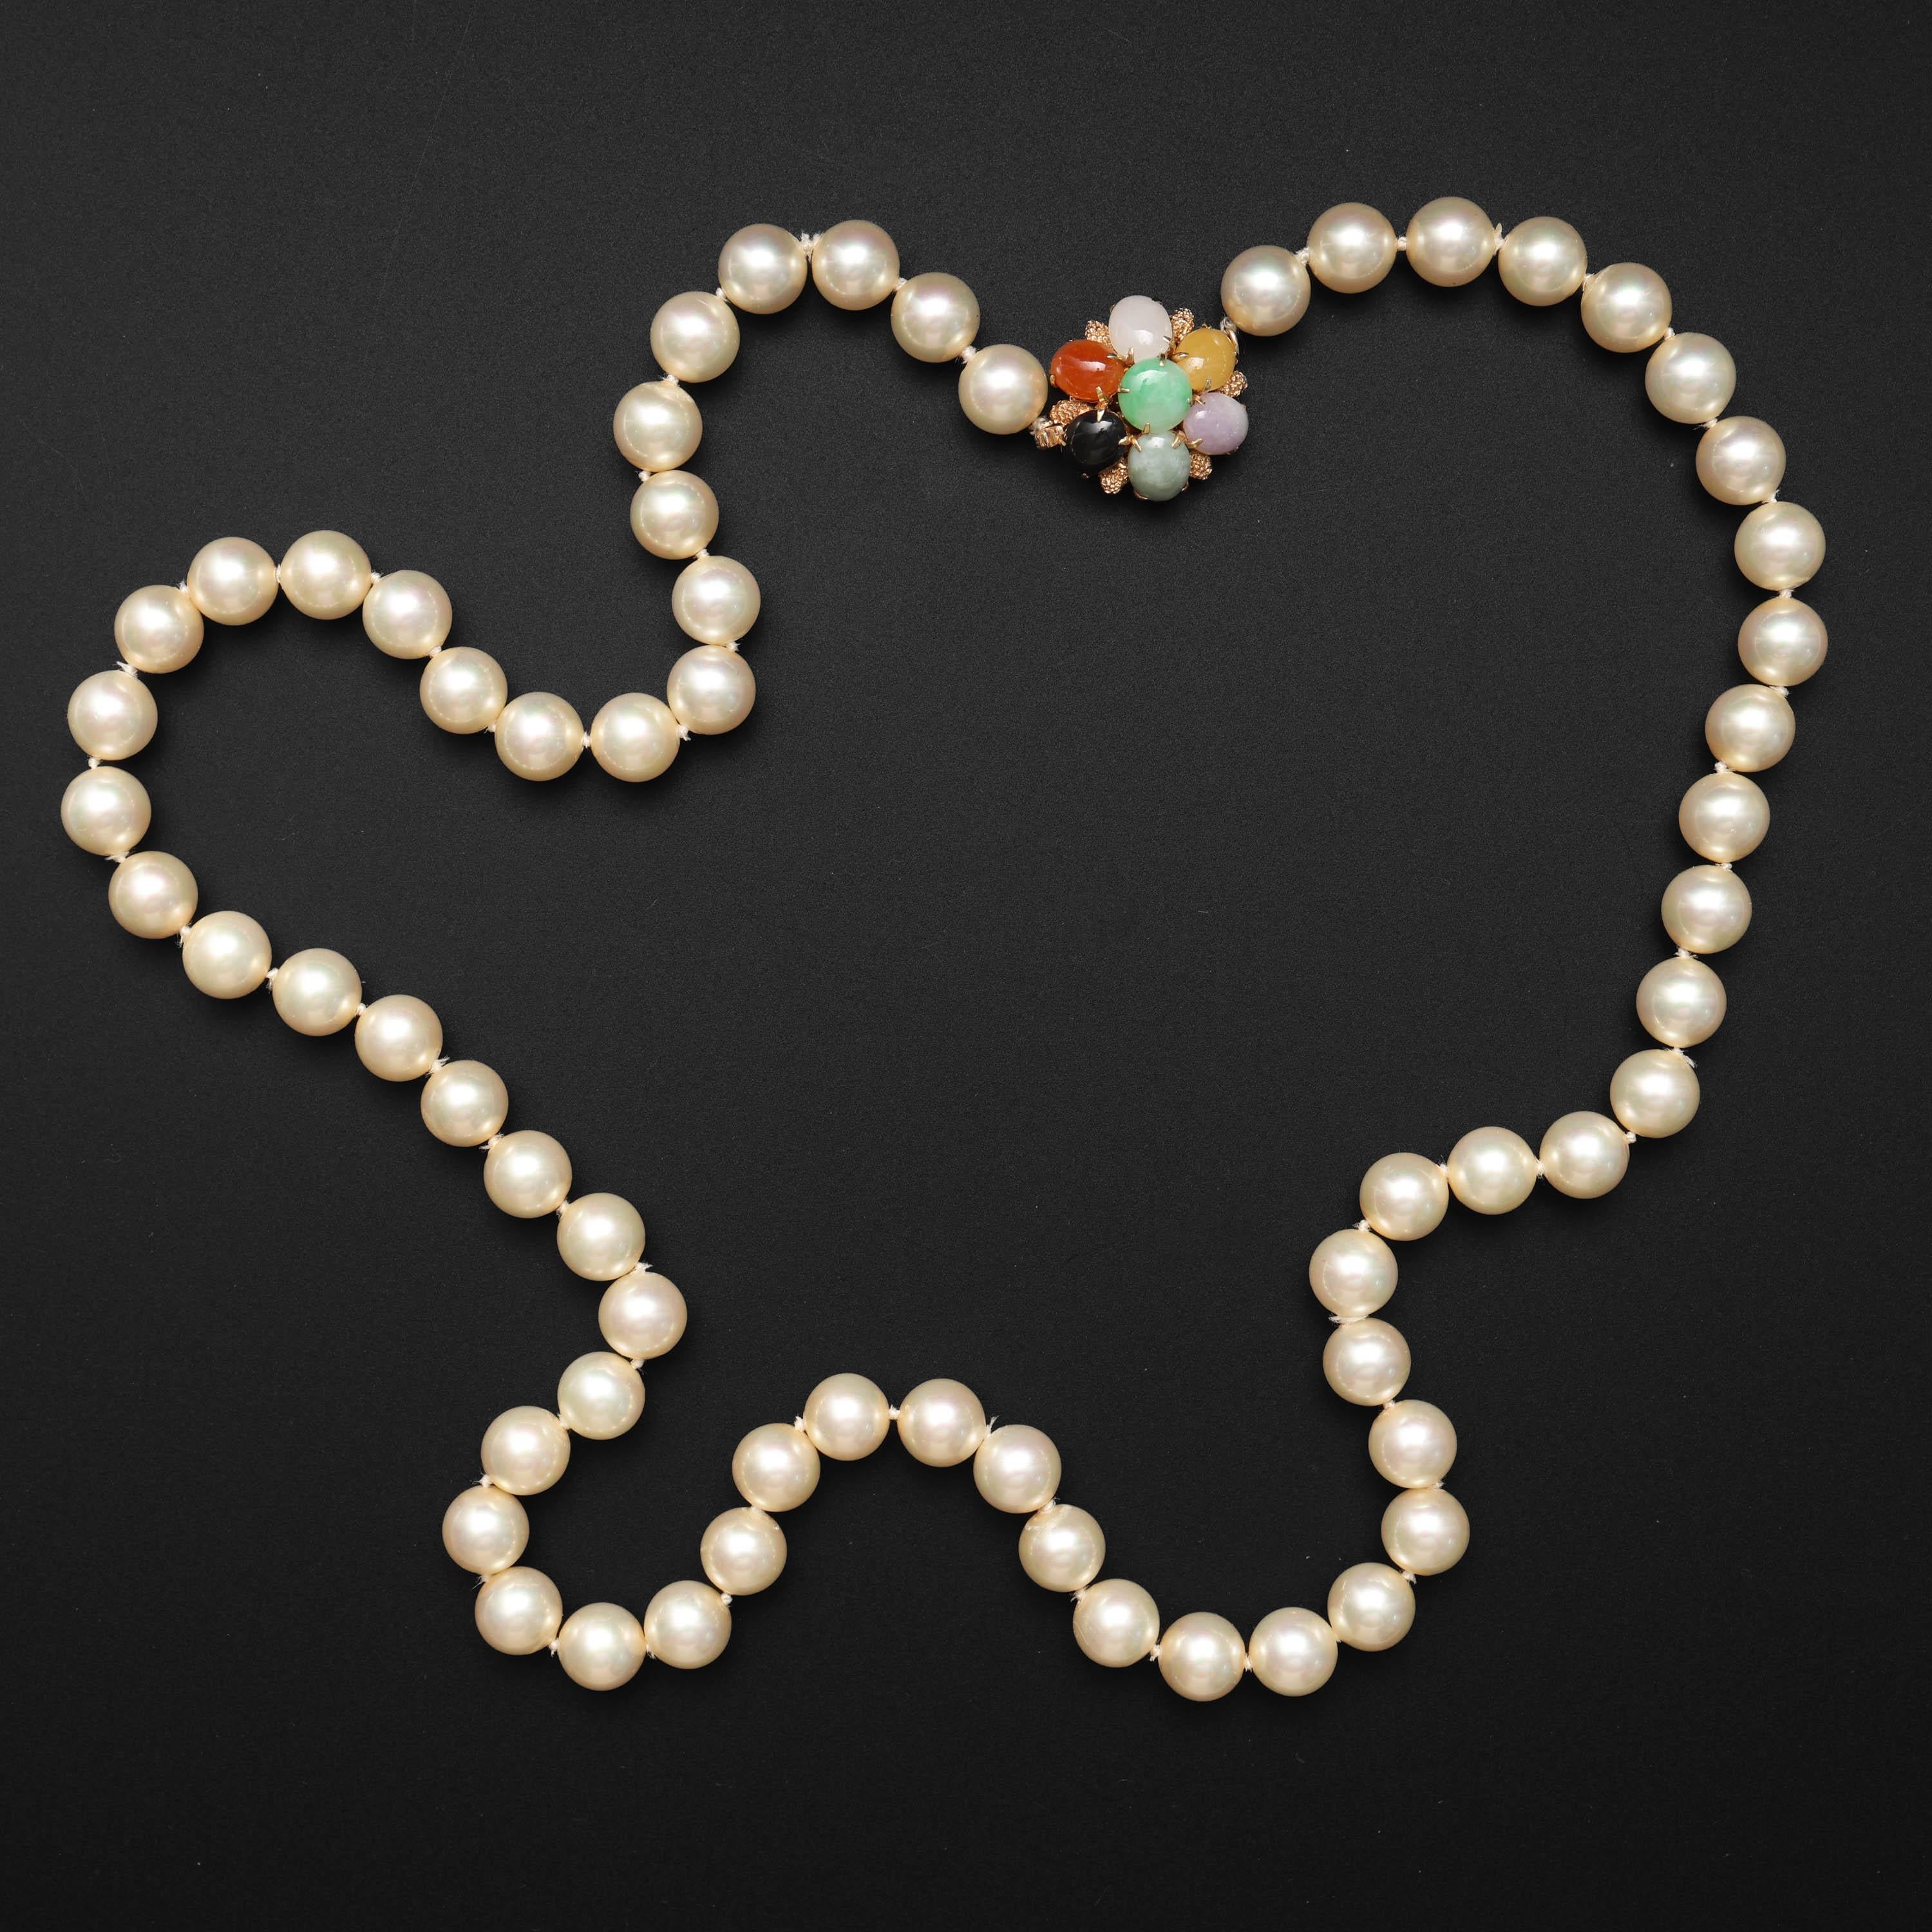 This pearl necklace features a certified jade clasp that has been certified natural and untreated. The creamy-white -almost golden- pearls average a luxurious 8.9mm in size -cultured Akoya pearls over 8mm are considered uncommon. Akoya pearls over